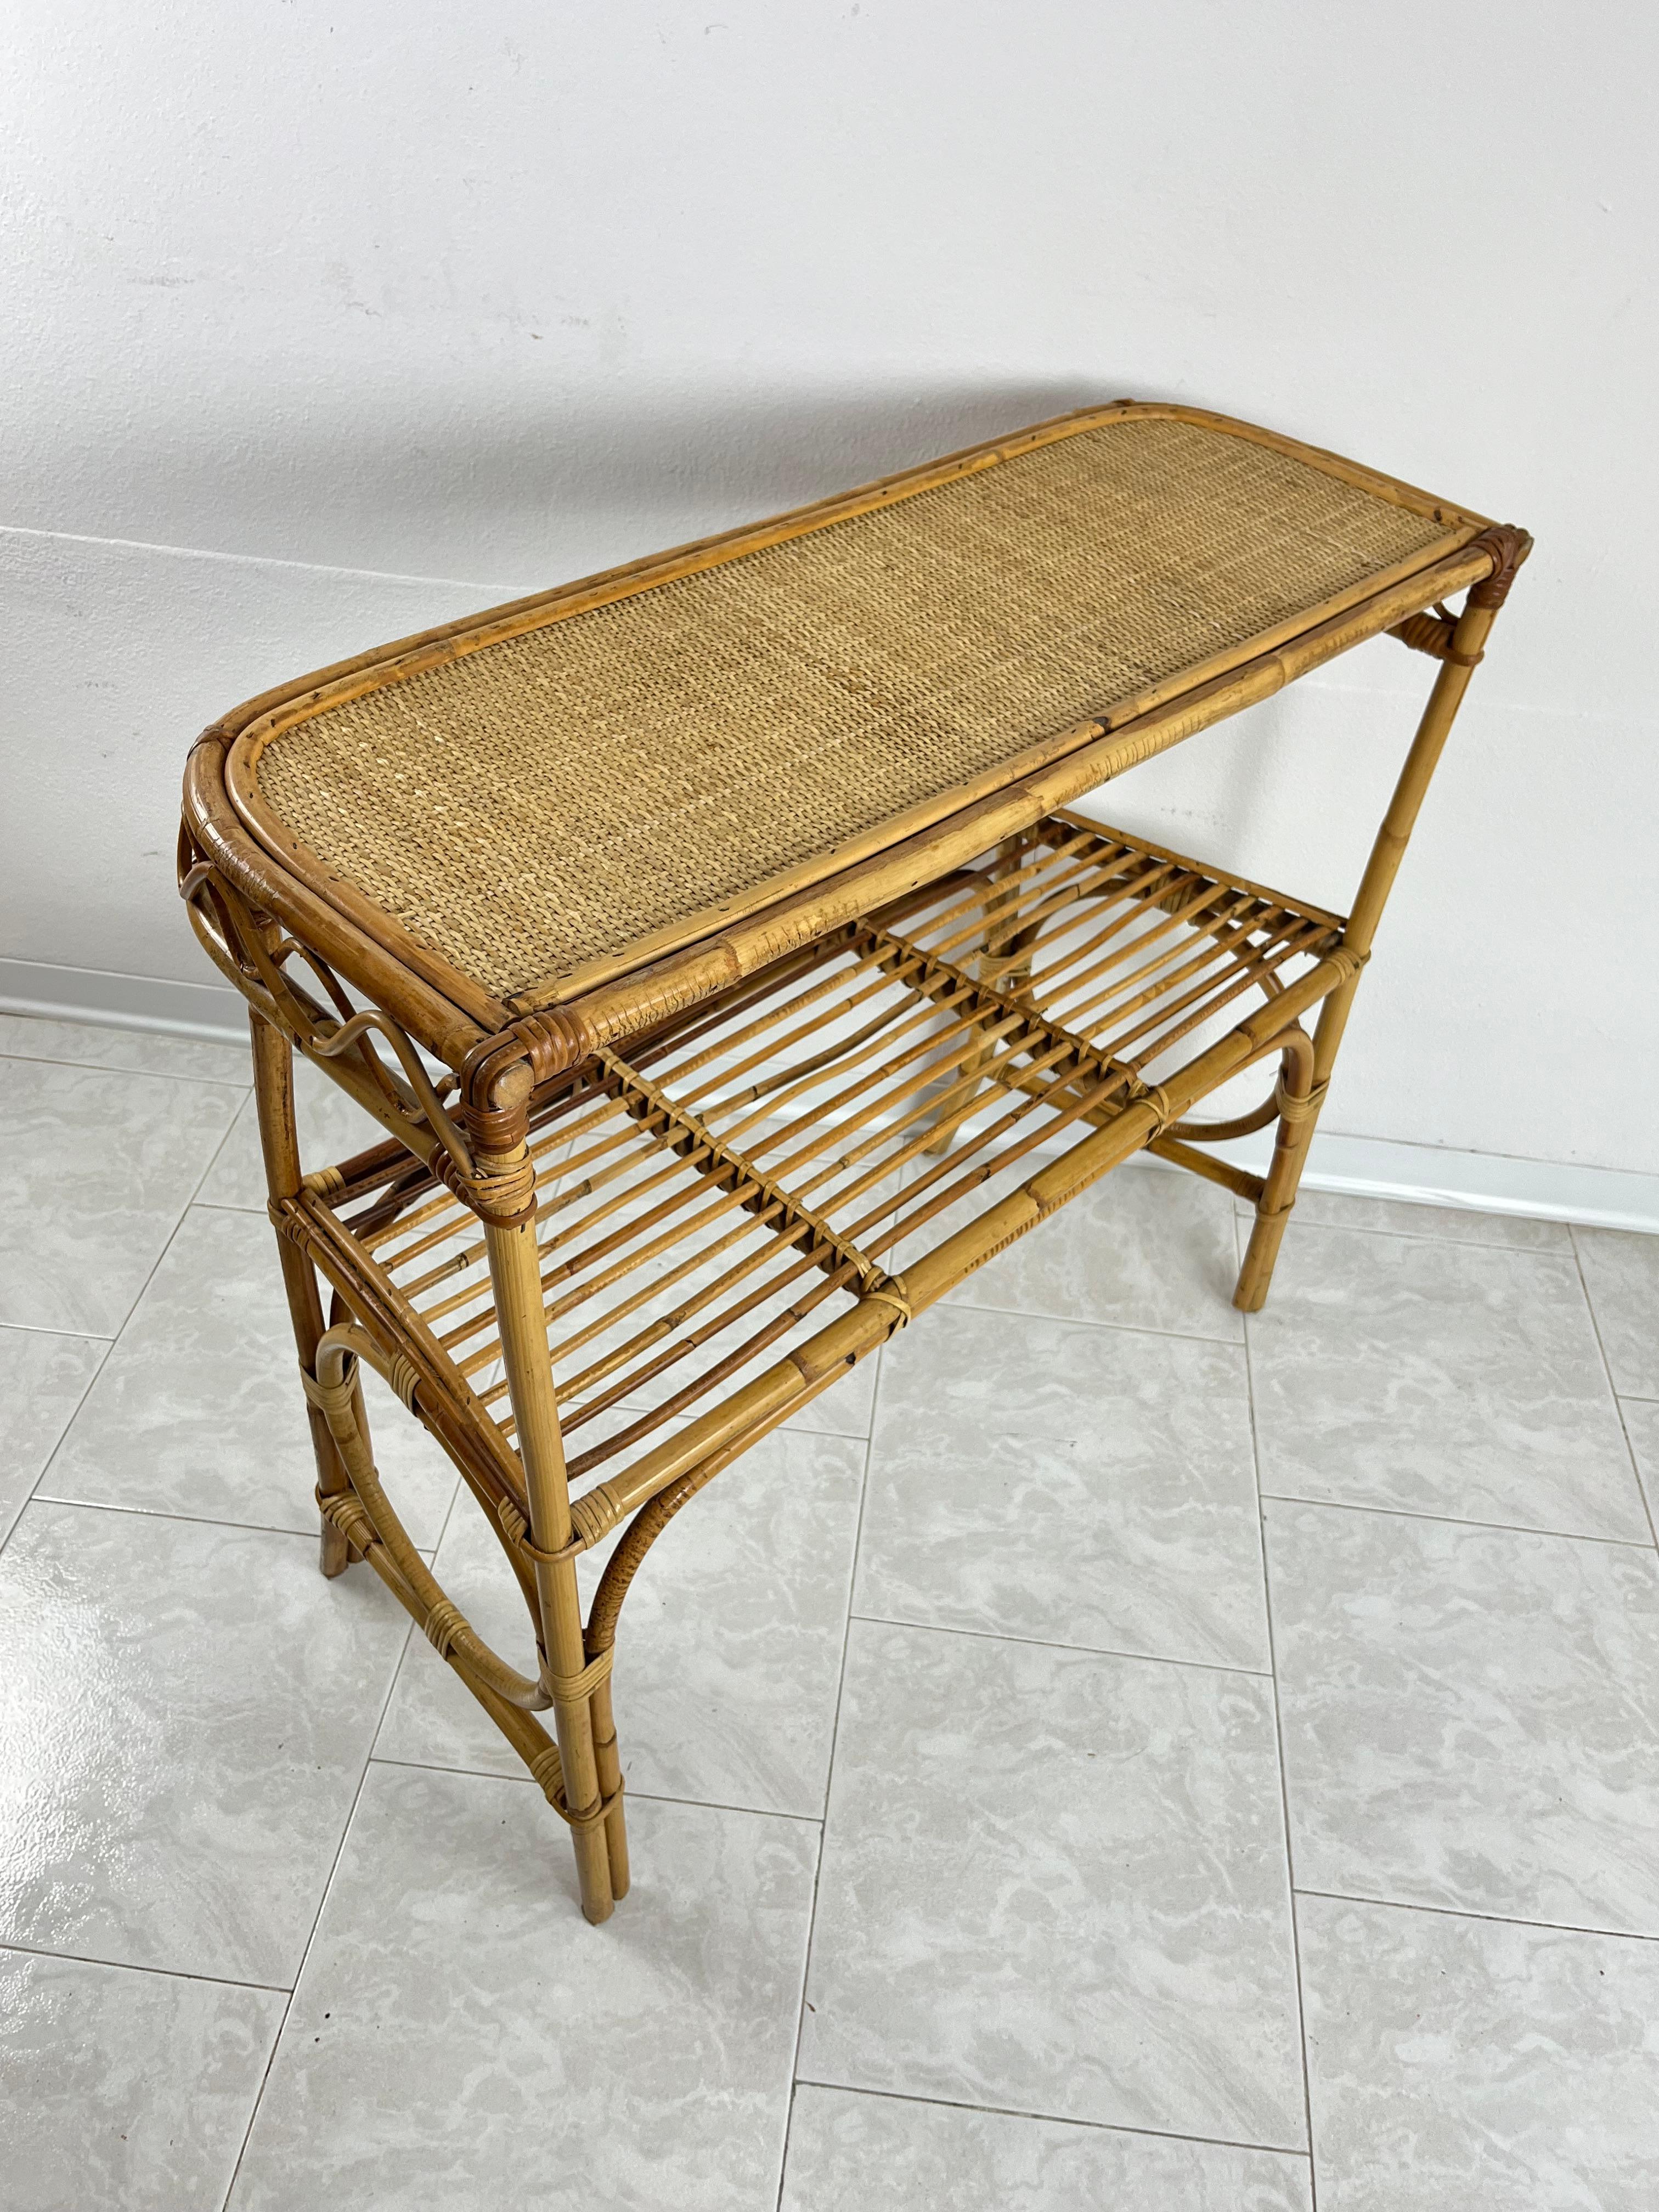 Mid-20th Century Mid-Century Wicker and Bamboo Console Attributed to Franco Albini 1960s For Sale